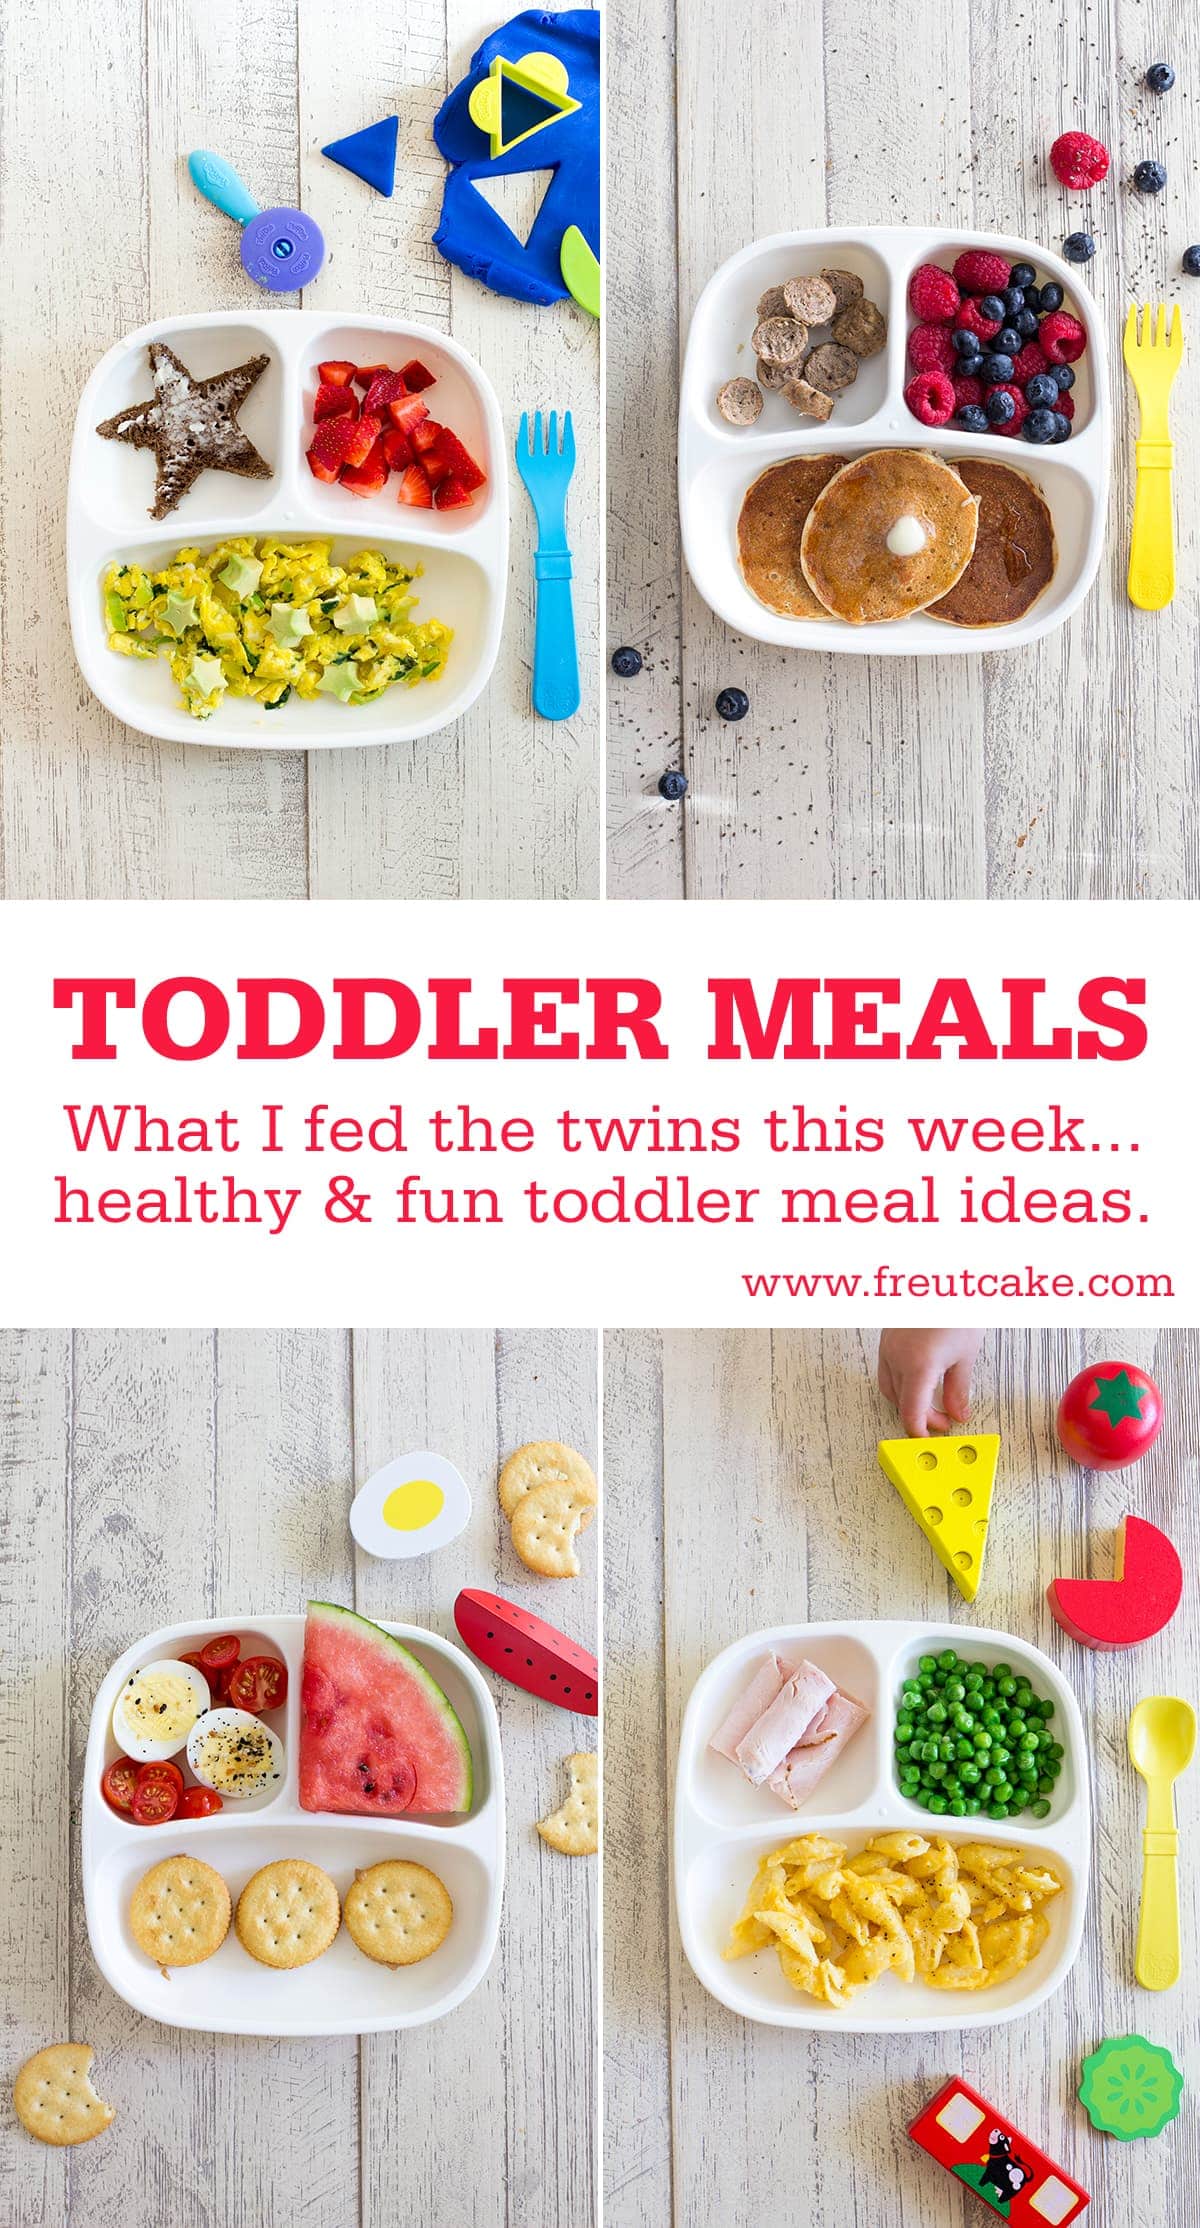 Toddler Meals What I Fed the Twins this Week